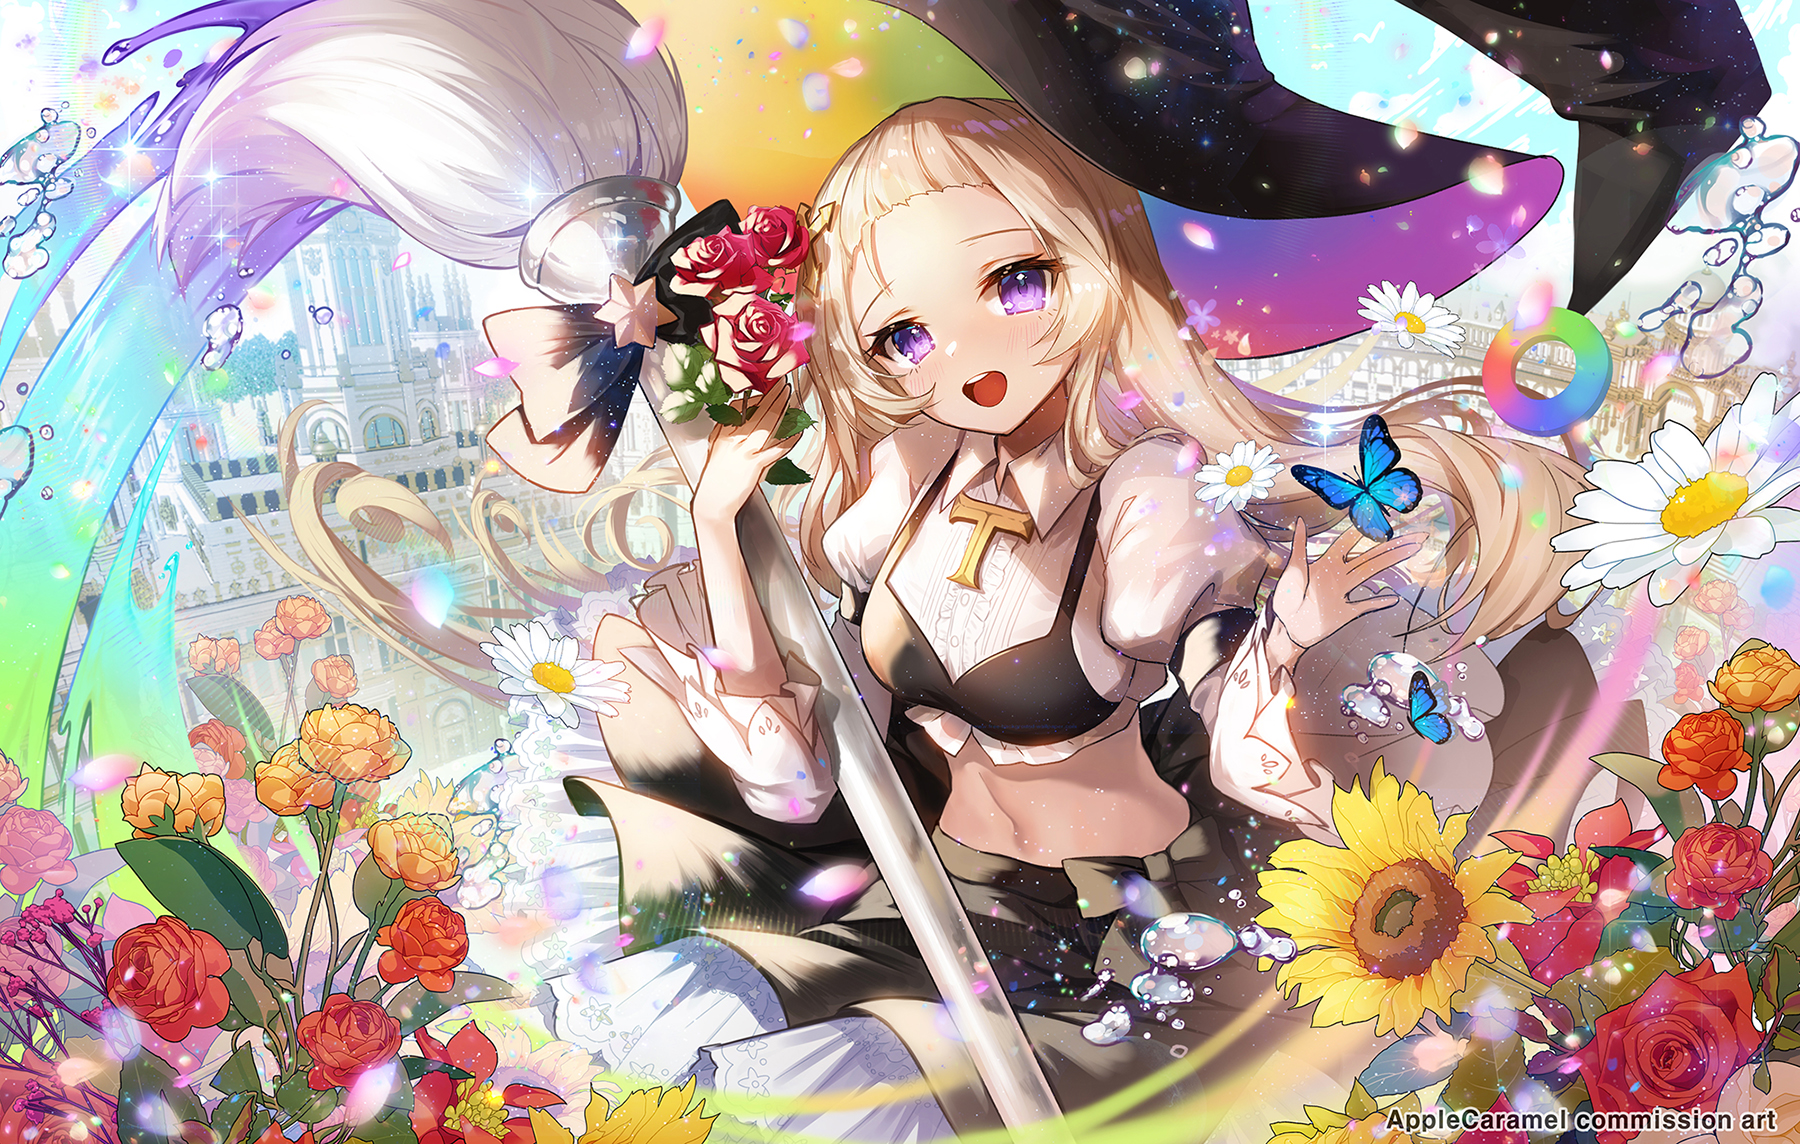 Anime Anime Girls Purple Eyes Blonde Flowers Plants Fantasy Girl Looking At Viewer Open Mouth 1800x1144